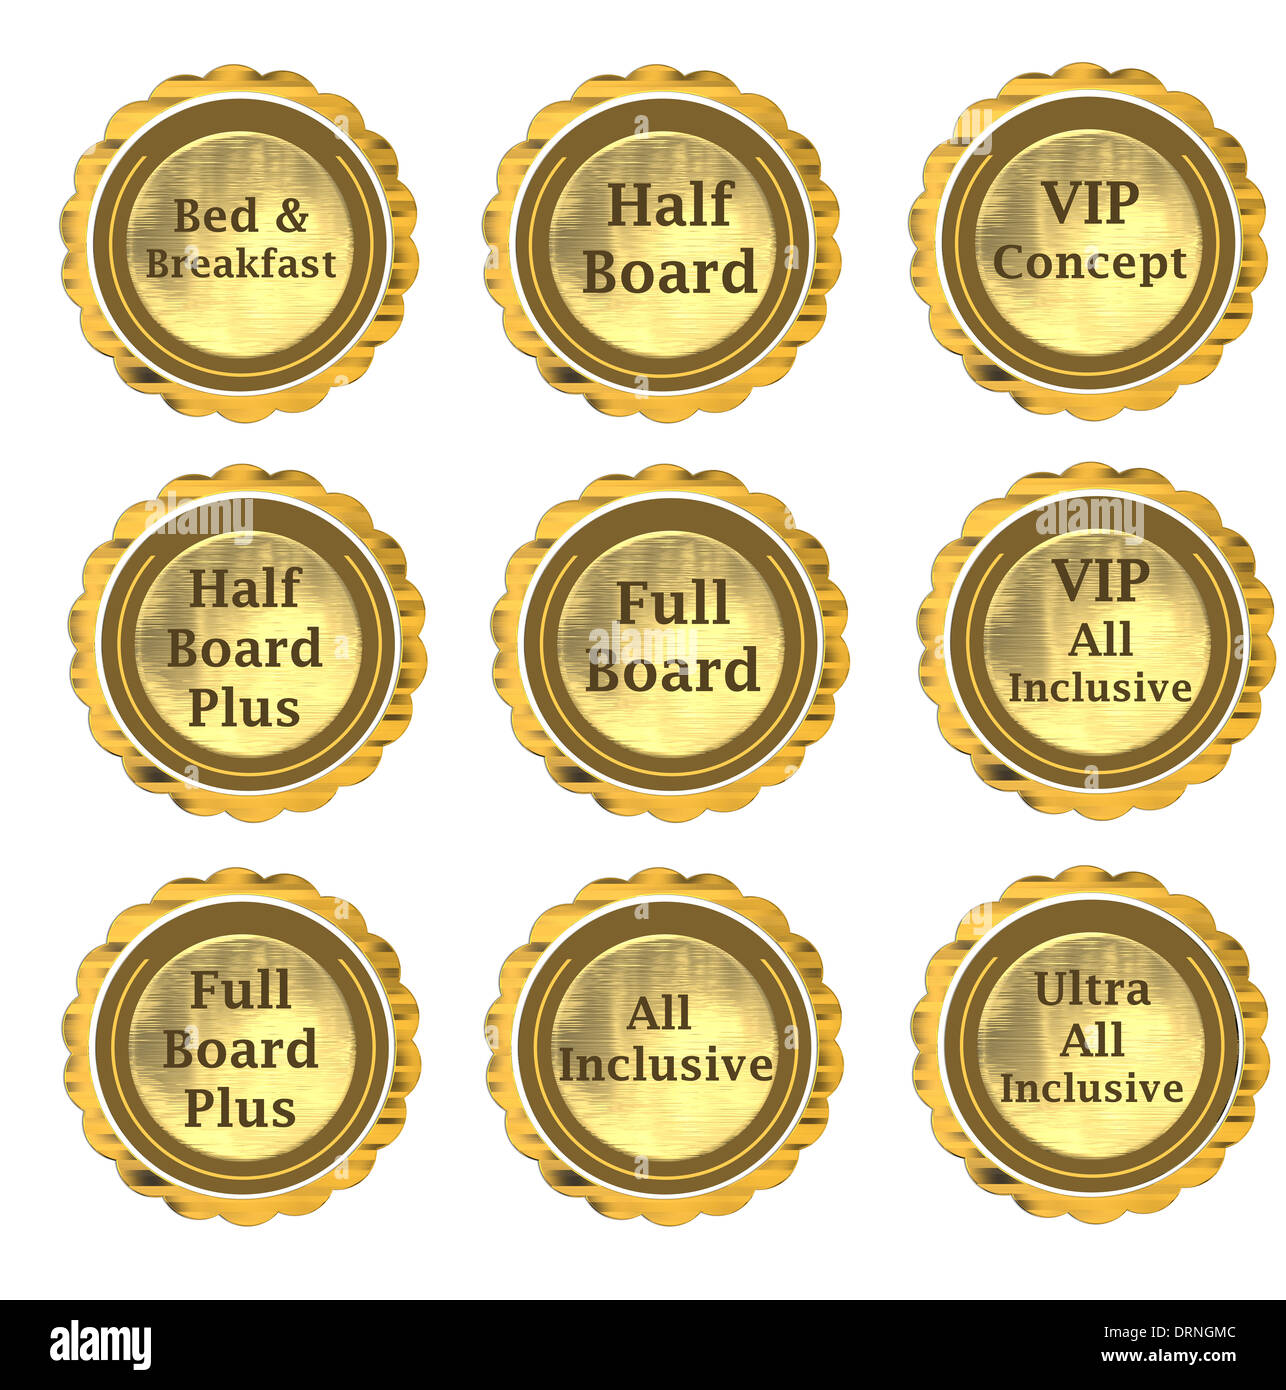 What is the difference between half board and full board?